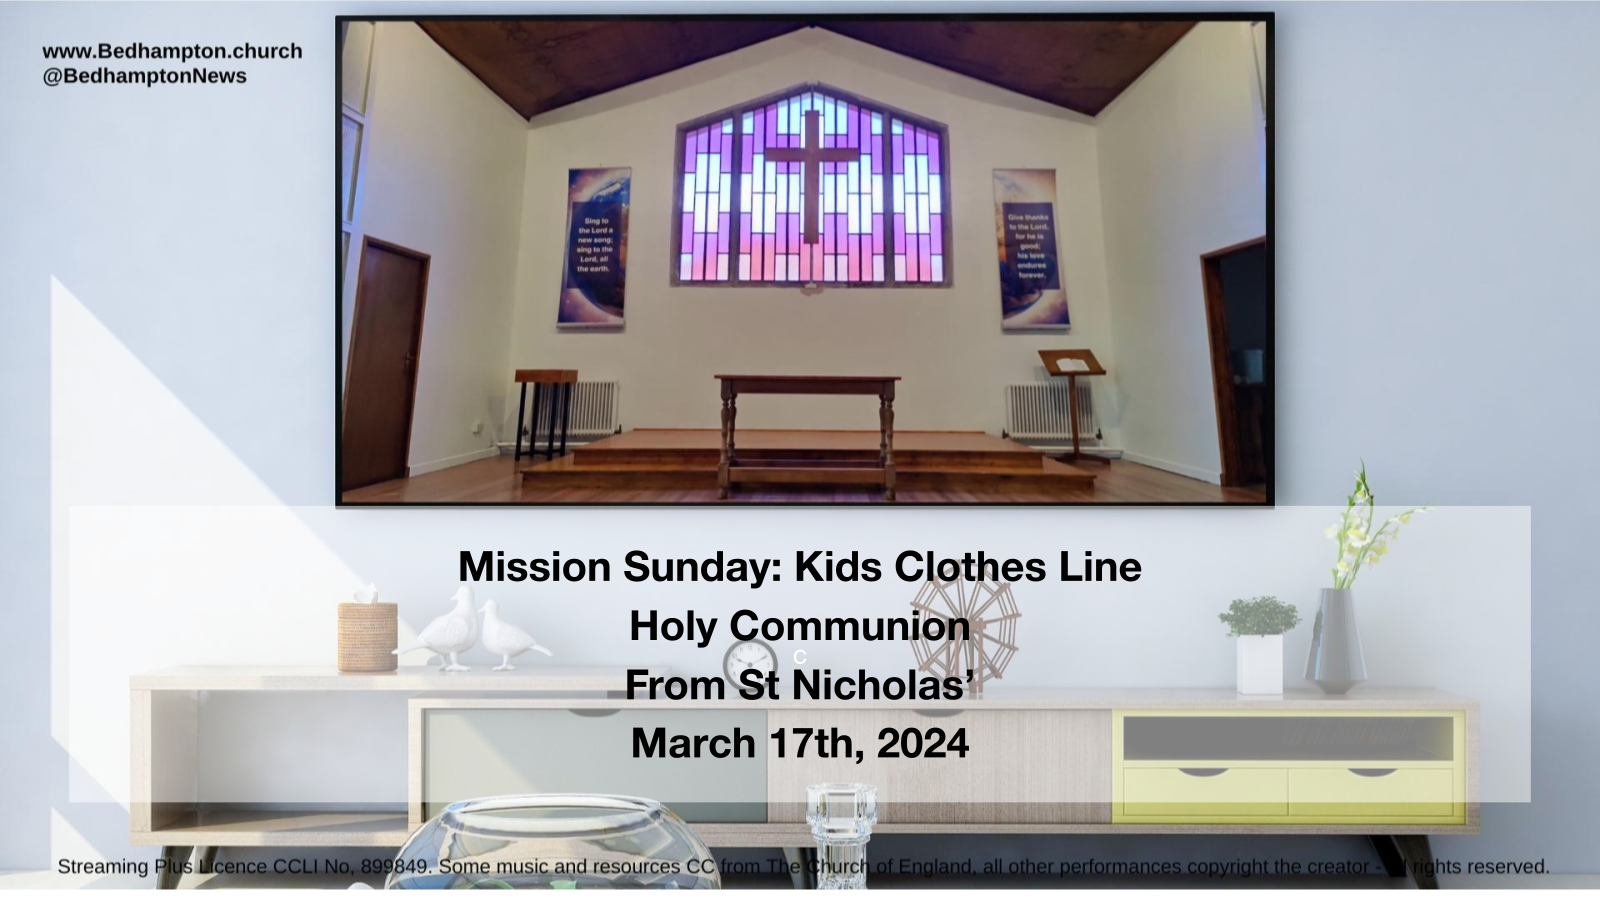 Holy Communion March 17th, 2024 – Mission Sunday: Kids Clothes Line